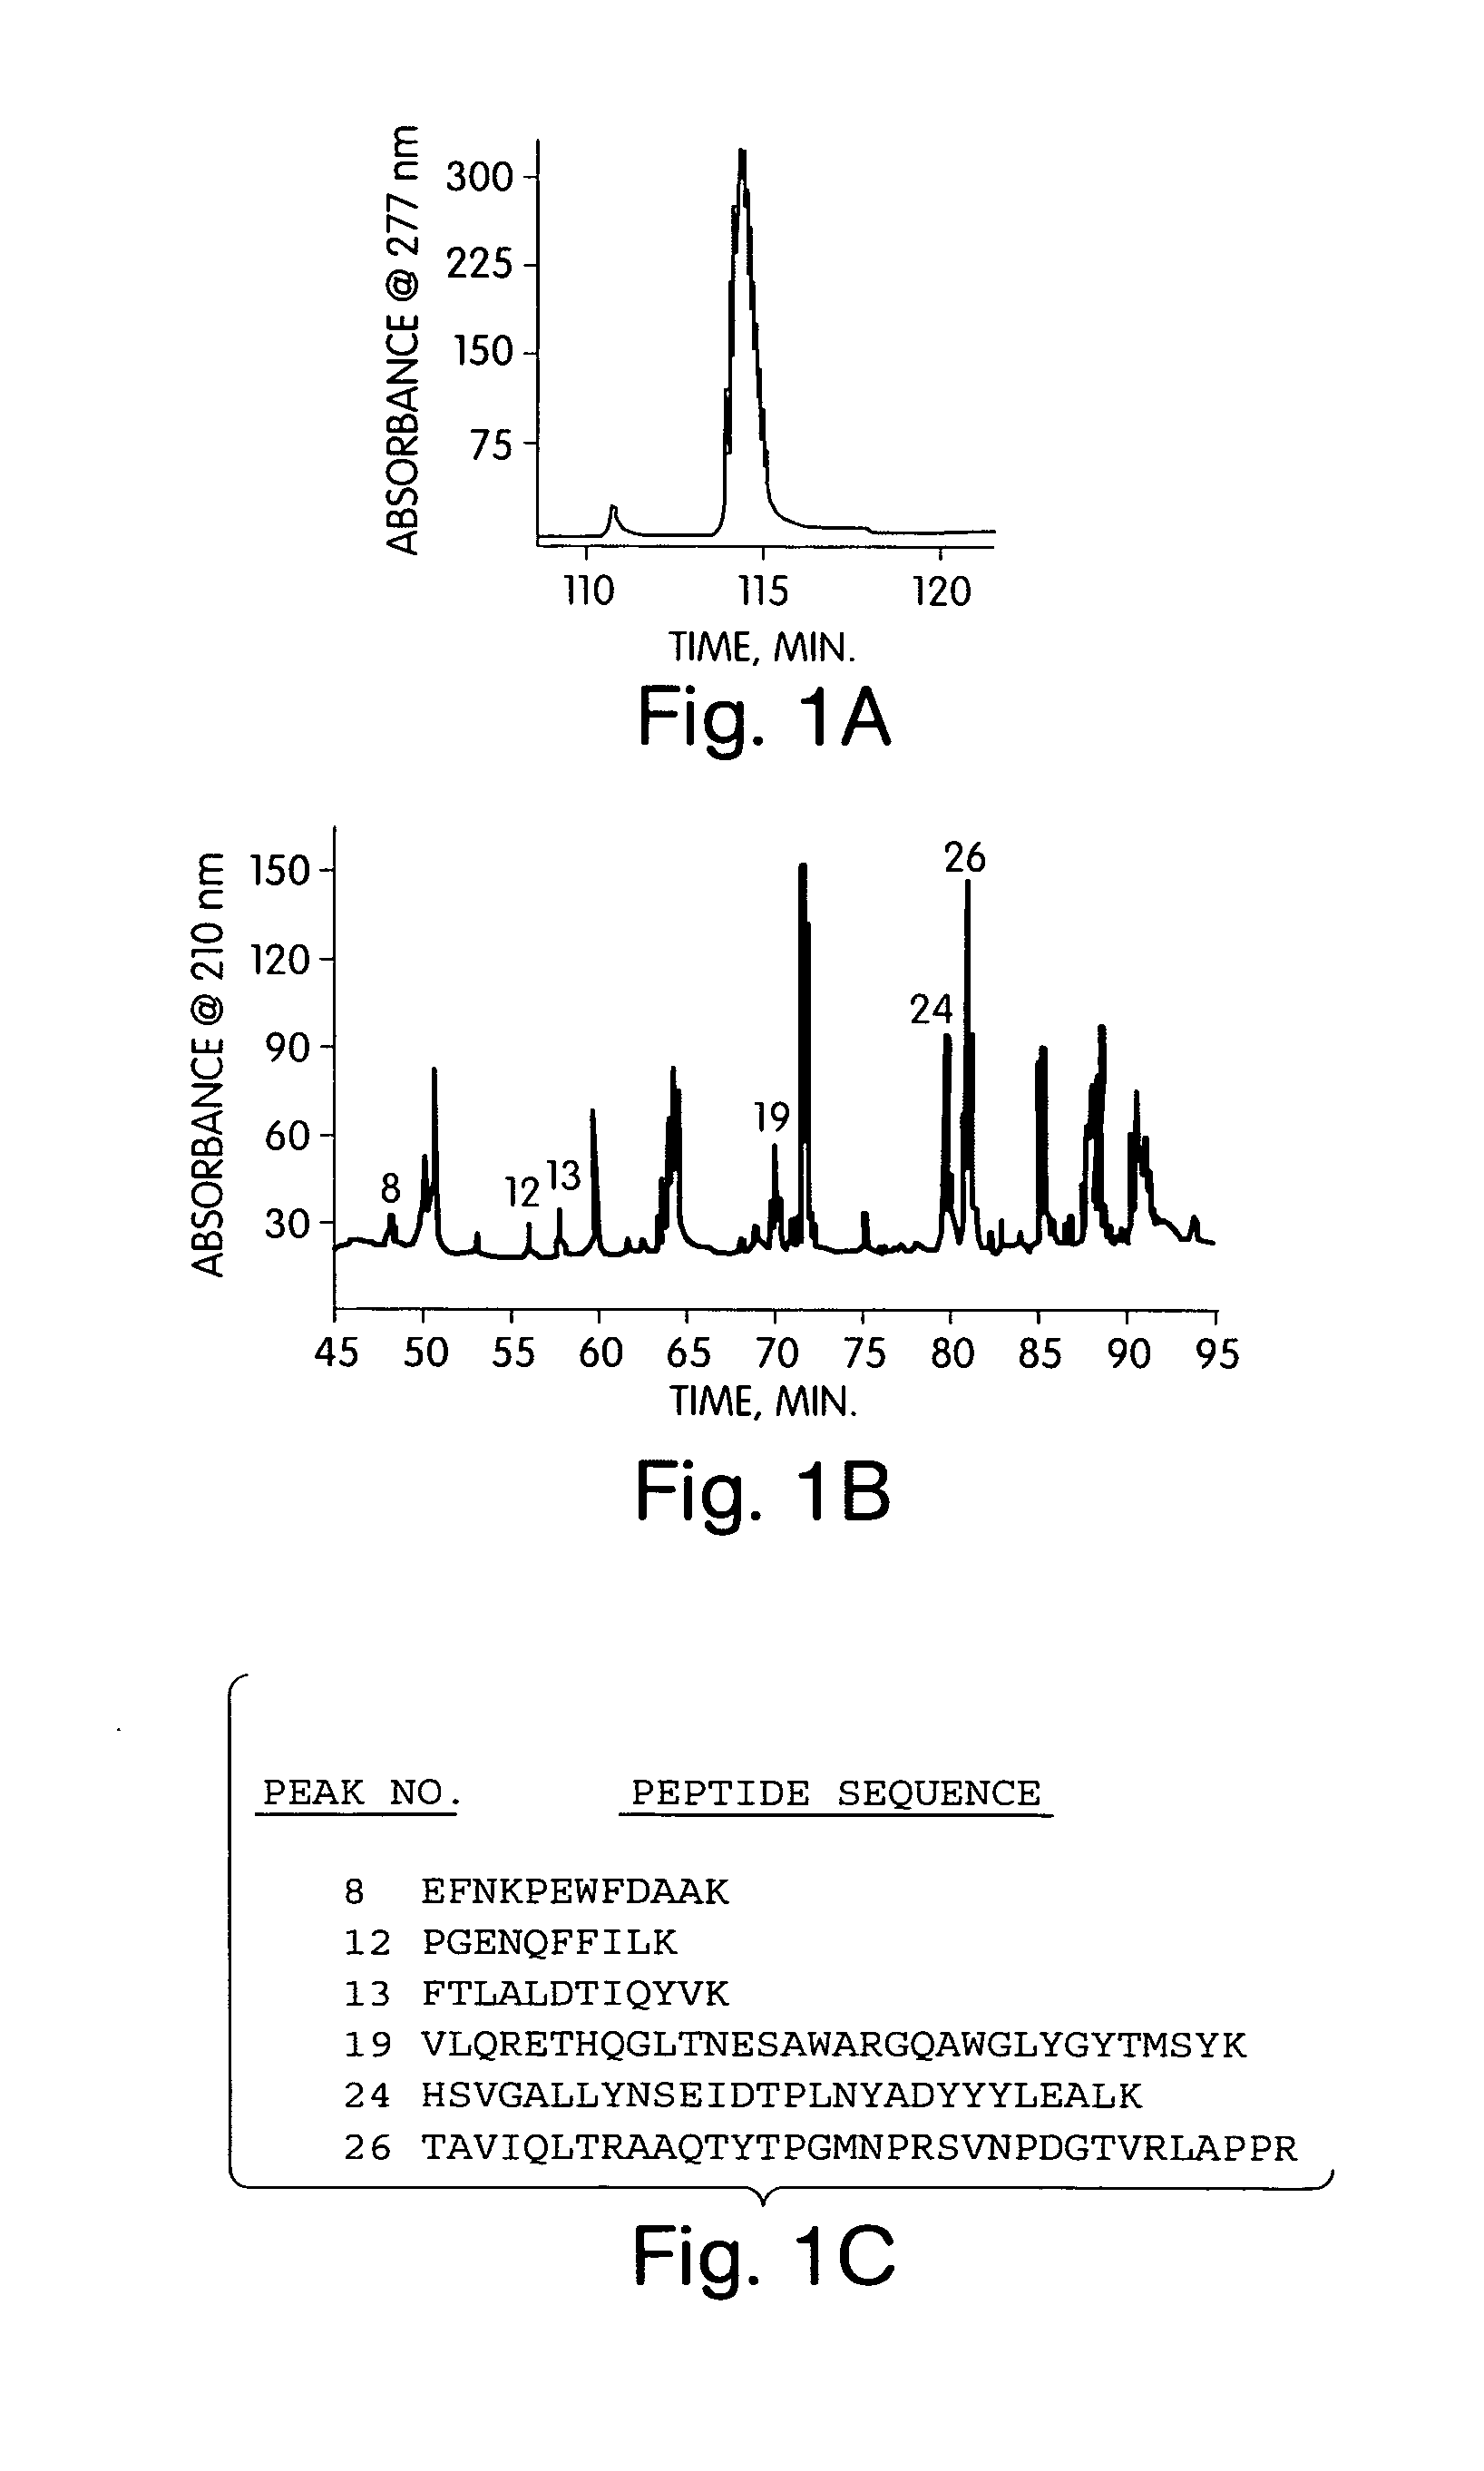 Delta 4, 5 glycuronidase and uses thereof